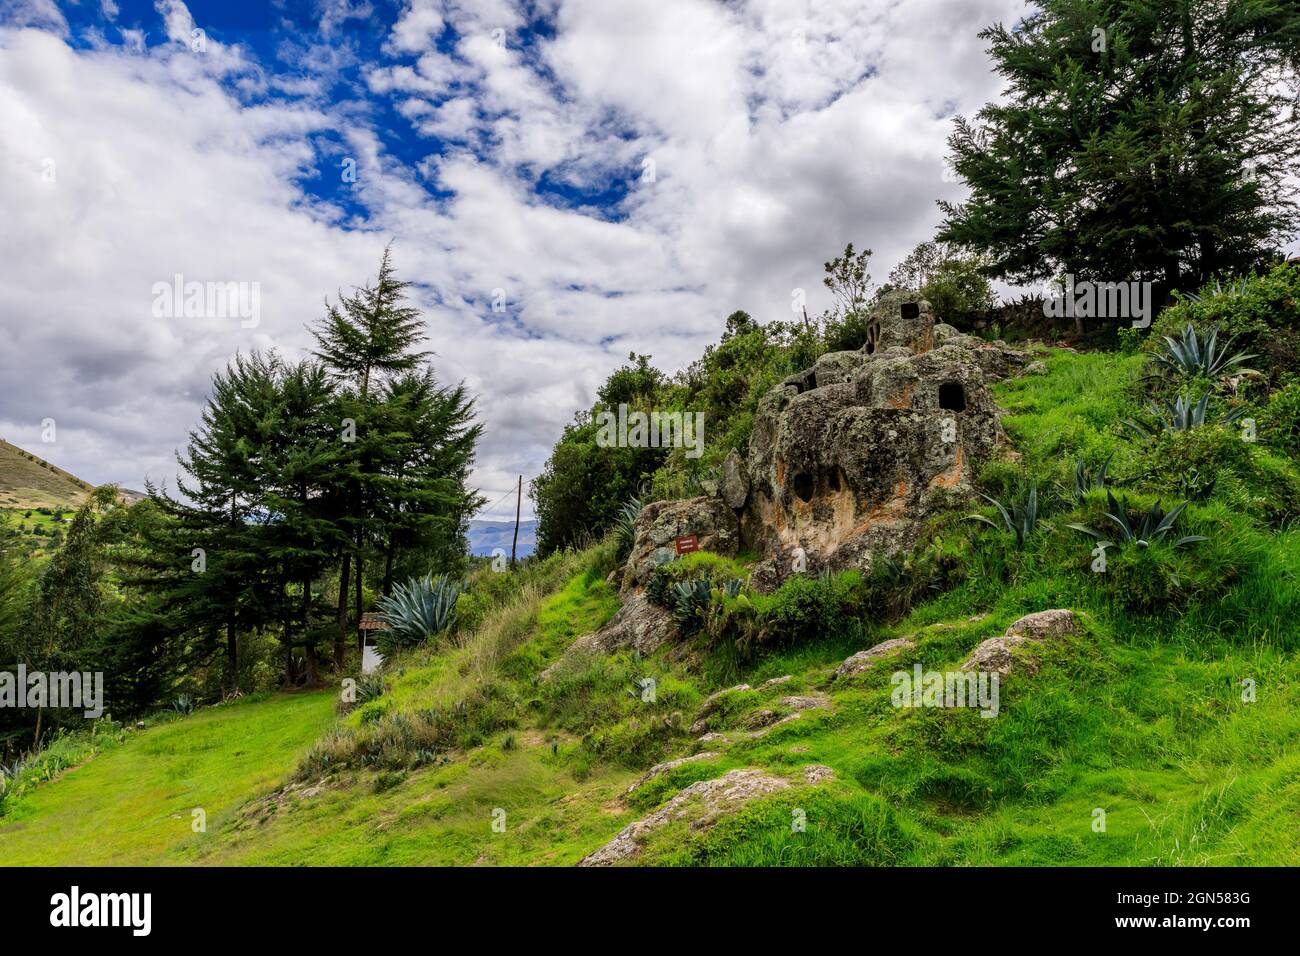 Left Side view of the 'Las Ventanillas de Otuzco' archaeological site in Baños del Inca district from Cajamarca province, Peru on a sunny day Stock Photo